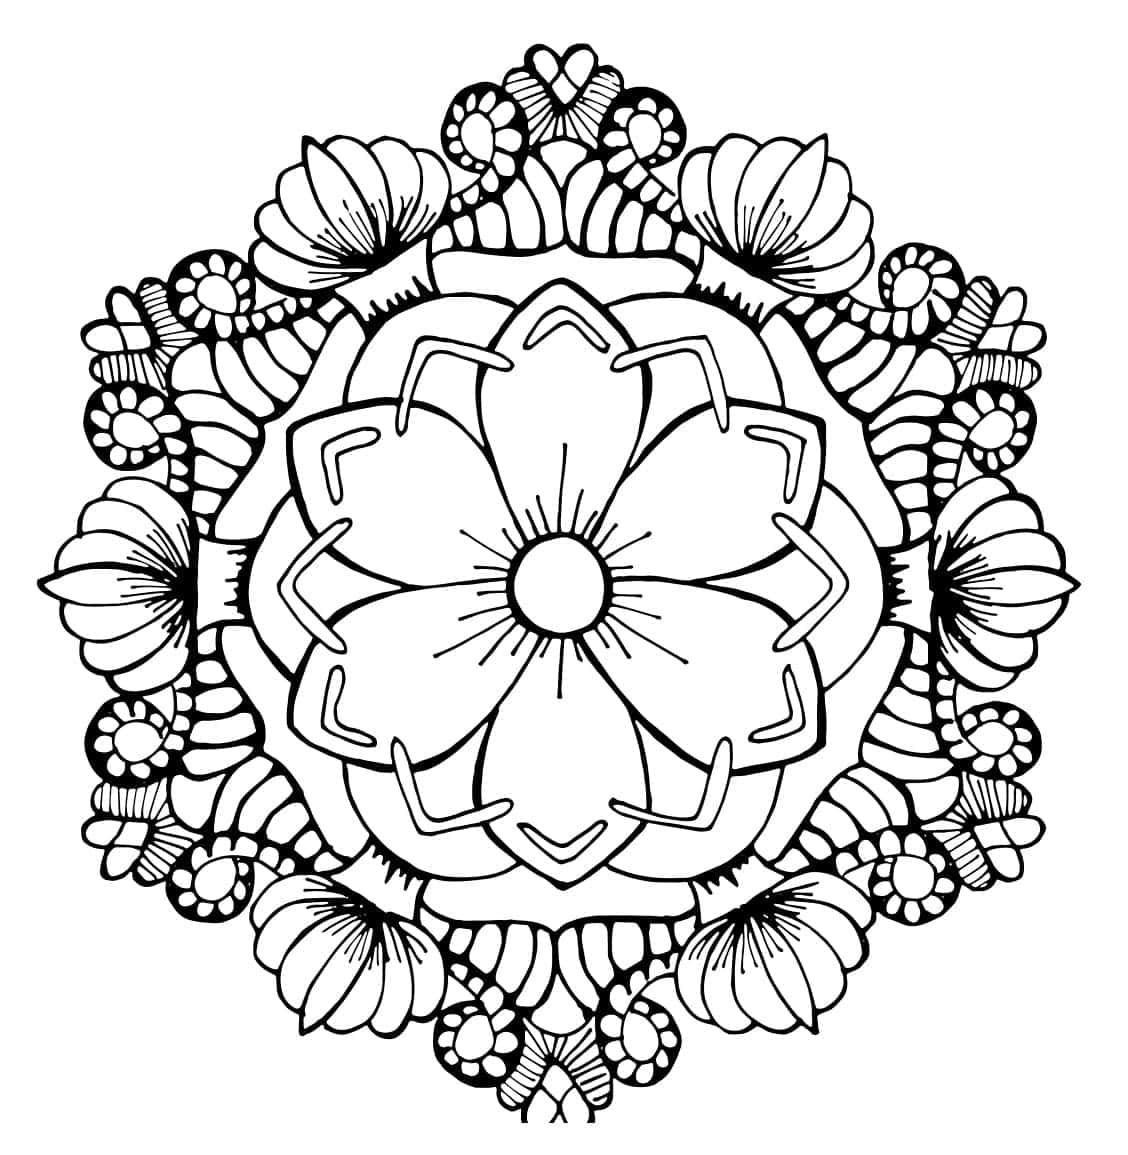 Bright and Colorful Flower Coloring Page